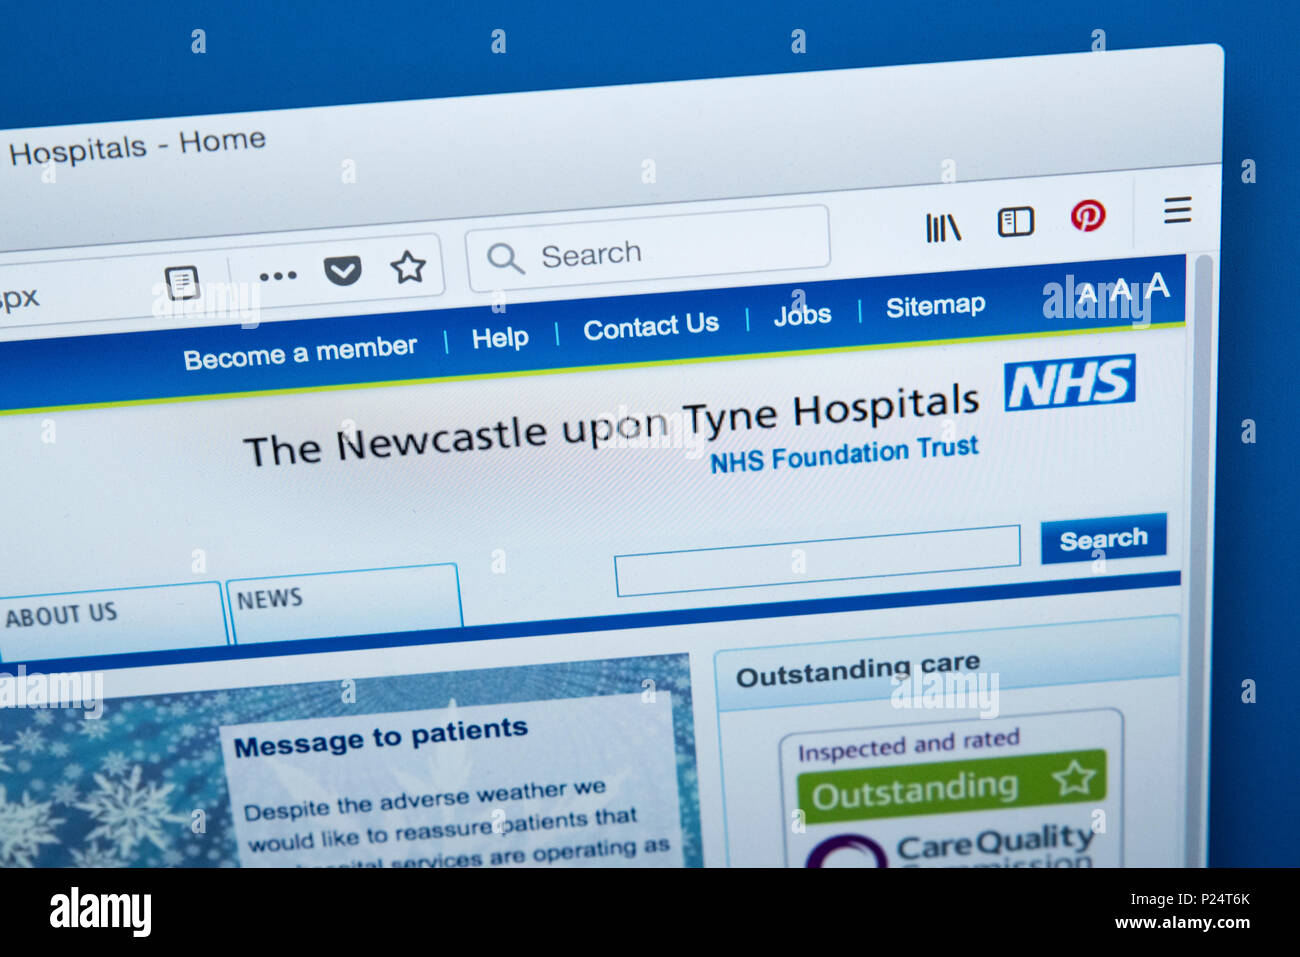 LONDON, UK - MARCH 5TH 2018: The homepage of the official website for the Newcastle Upon Tyne Hospitals NHS Foundation Trust in the UK, on 5th March 2 Stock Photo